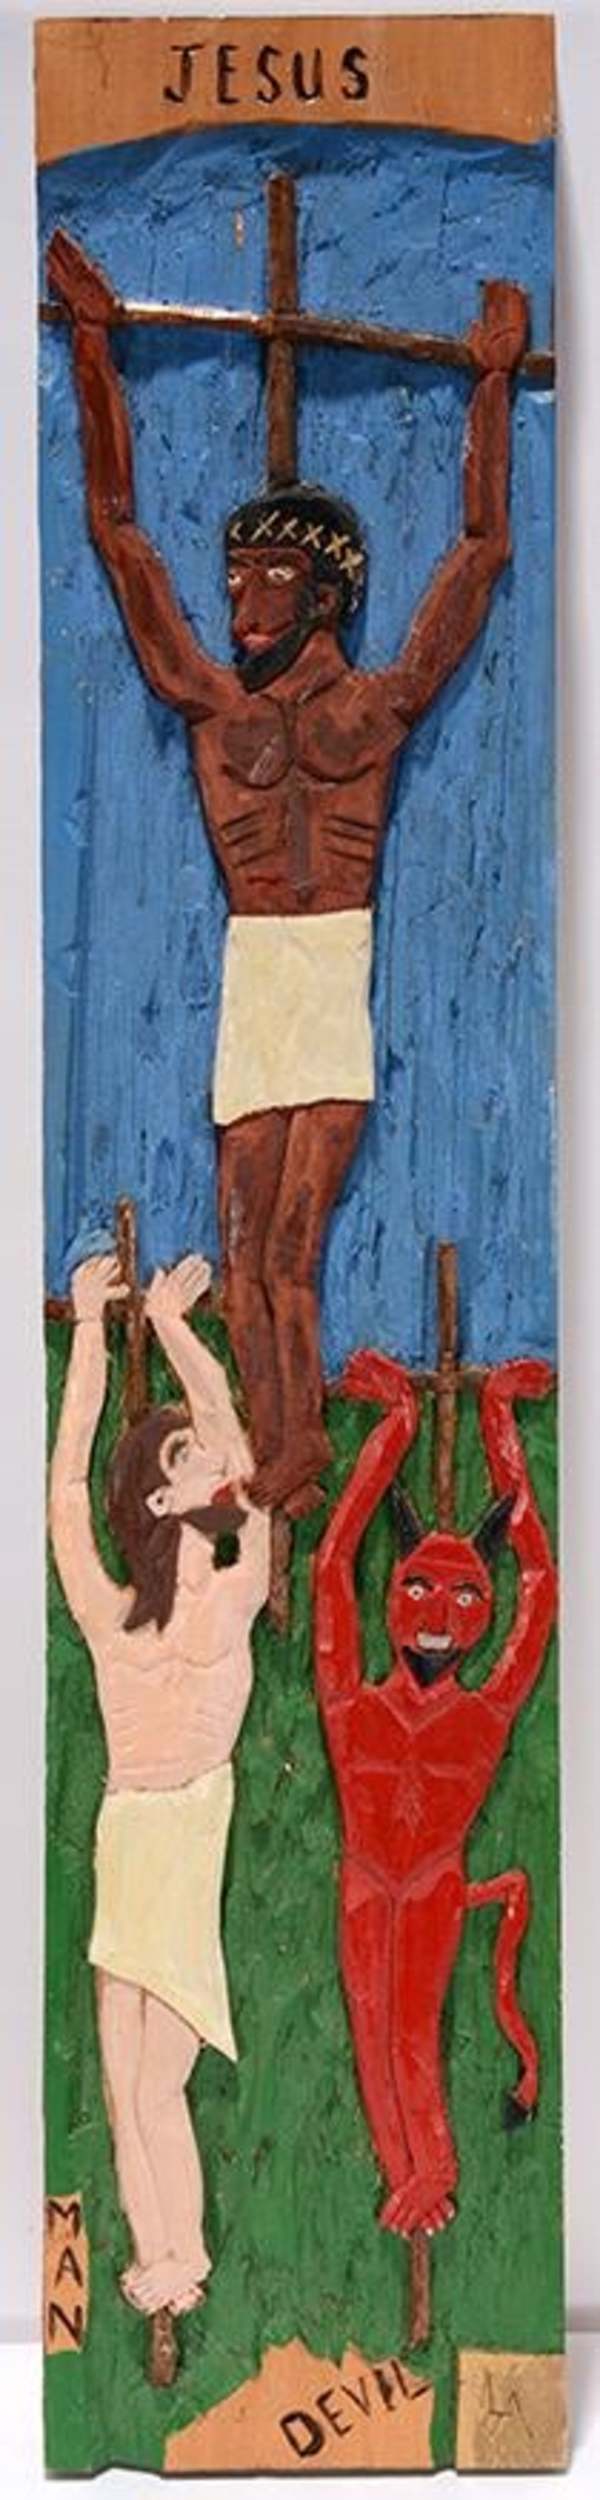 Jesus, Man and The Devil On The Cross by Leroy Almon